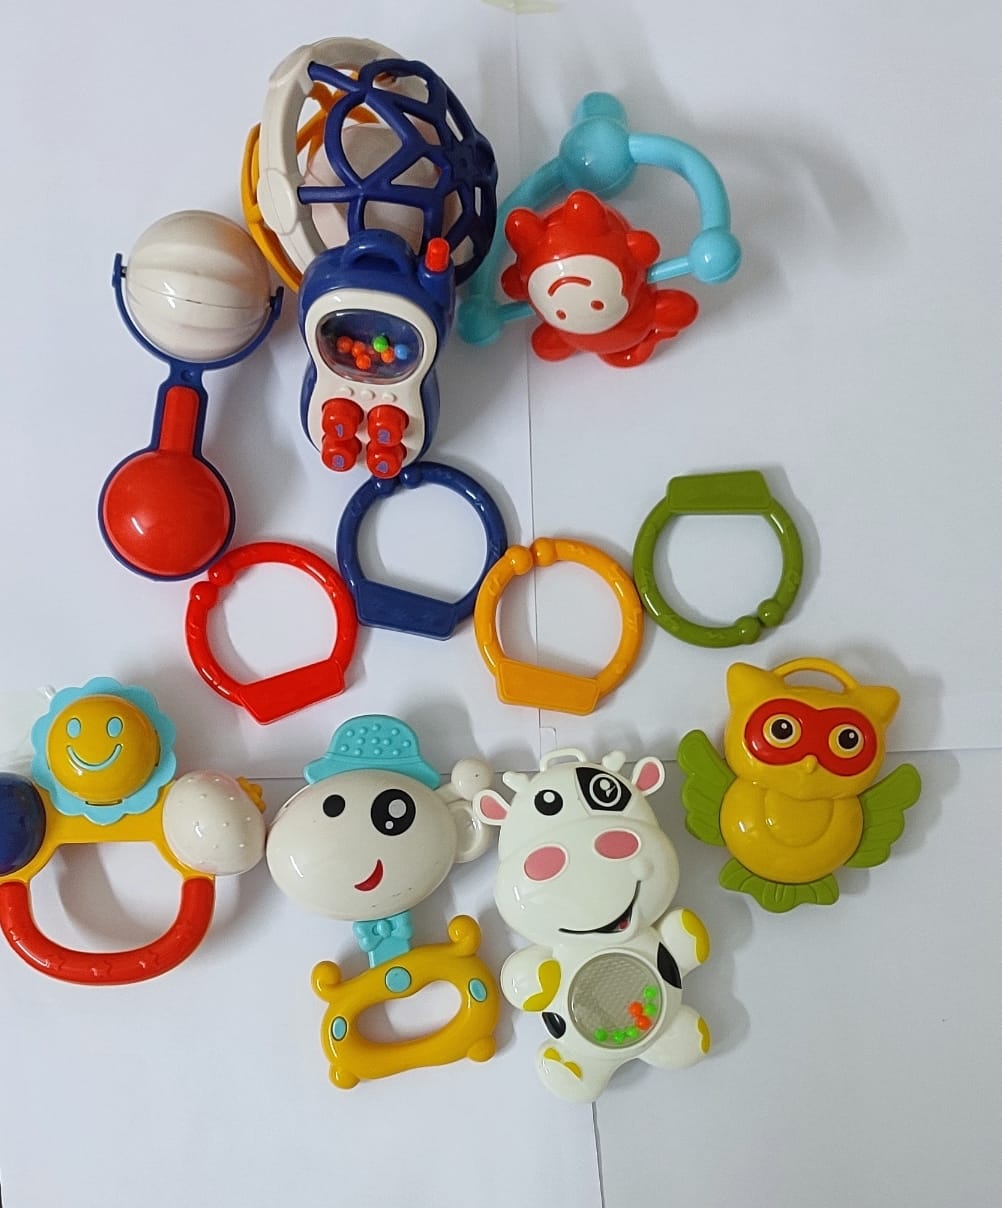 12PCS Baby Rattles Set Baby Rattles Toys Silicone Teether Rattles Hand Shake Bed Bell Trolley Rattles Baby Toddler Toys Handbell Rattle Newborns Educational Gift